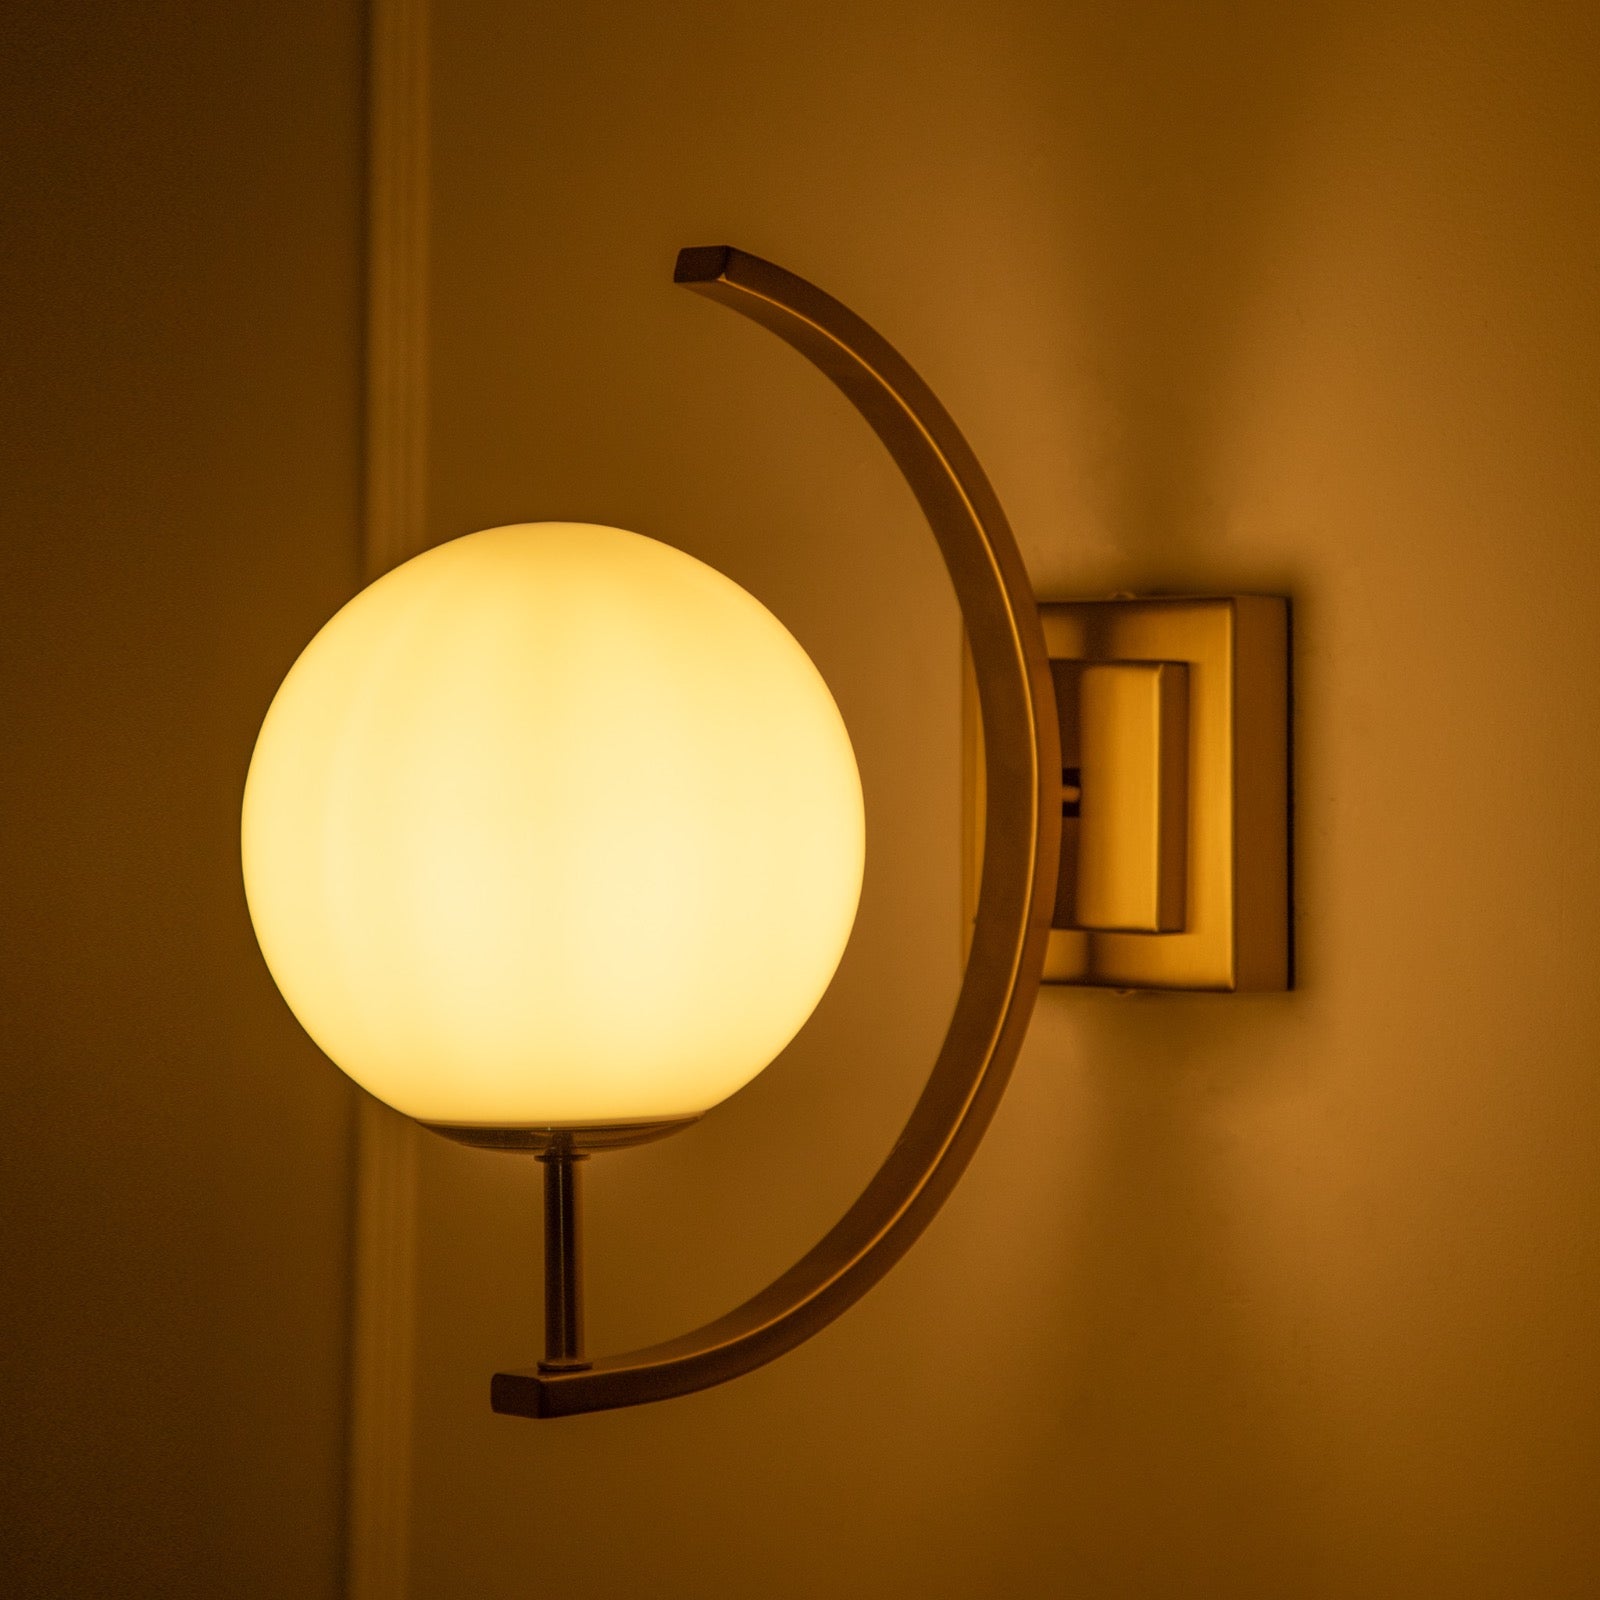 Buy Rise Up Wall Light online